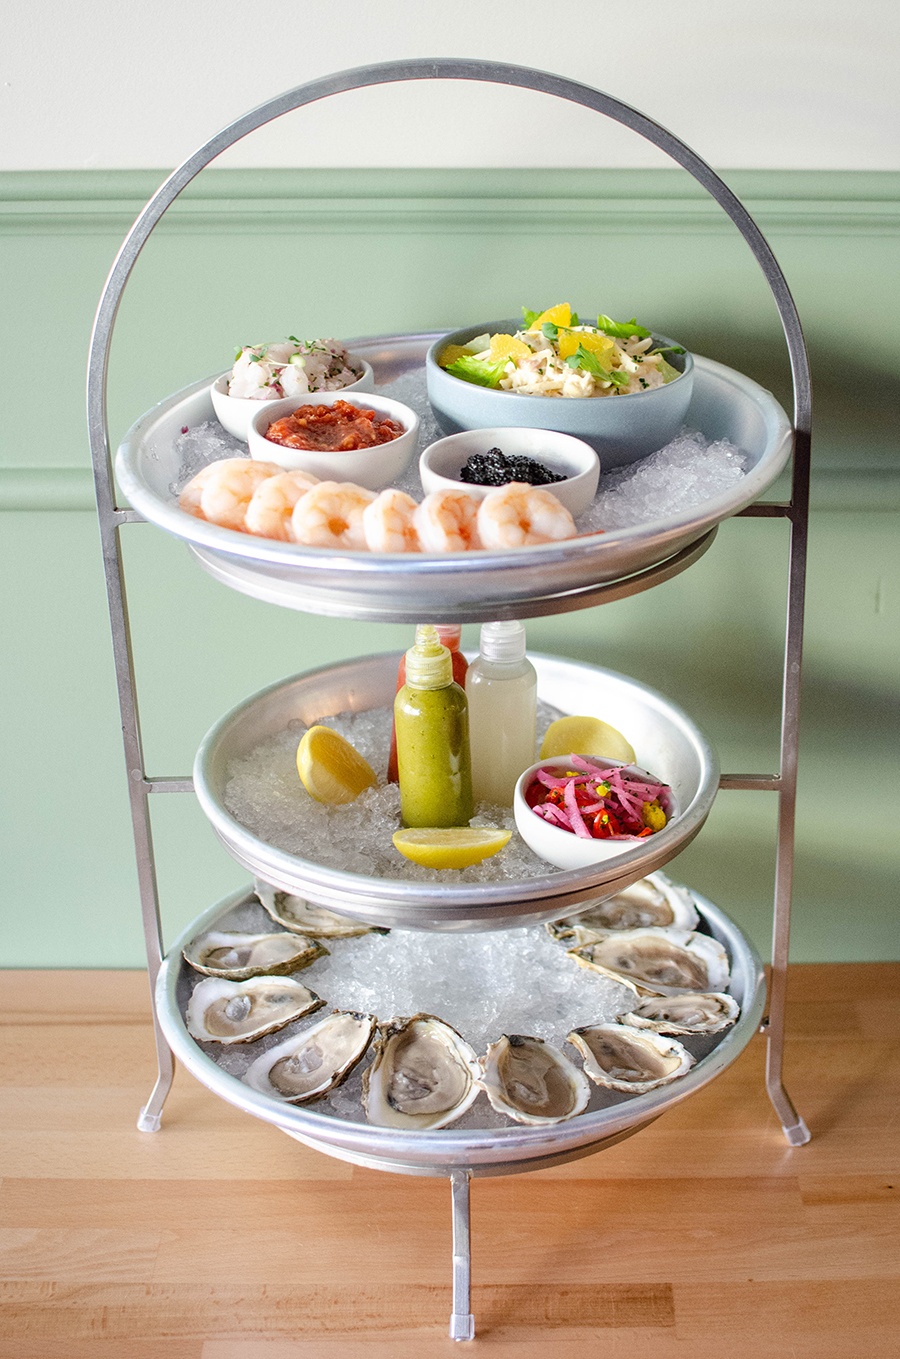 A three-story tower of silver trays holds raw bar items and sauces. It sits on a light wooden table in front of a pale green wall.